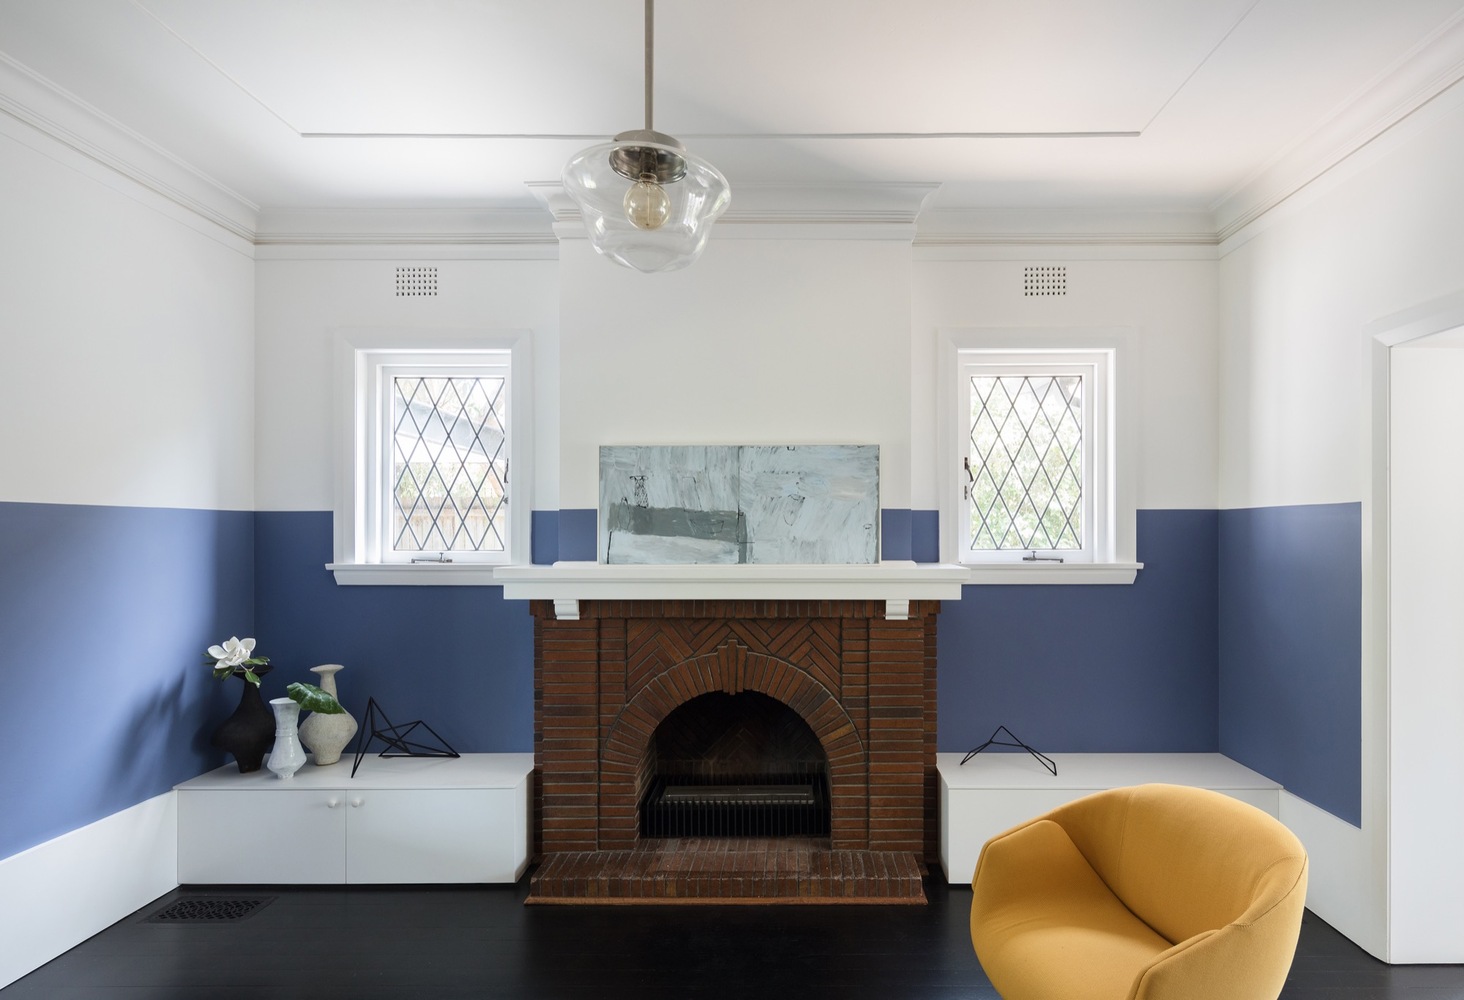 A Quirky Renovation Beautifully Reinterprets this 1930s Bungalow